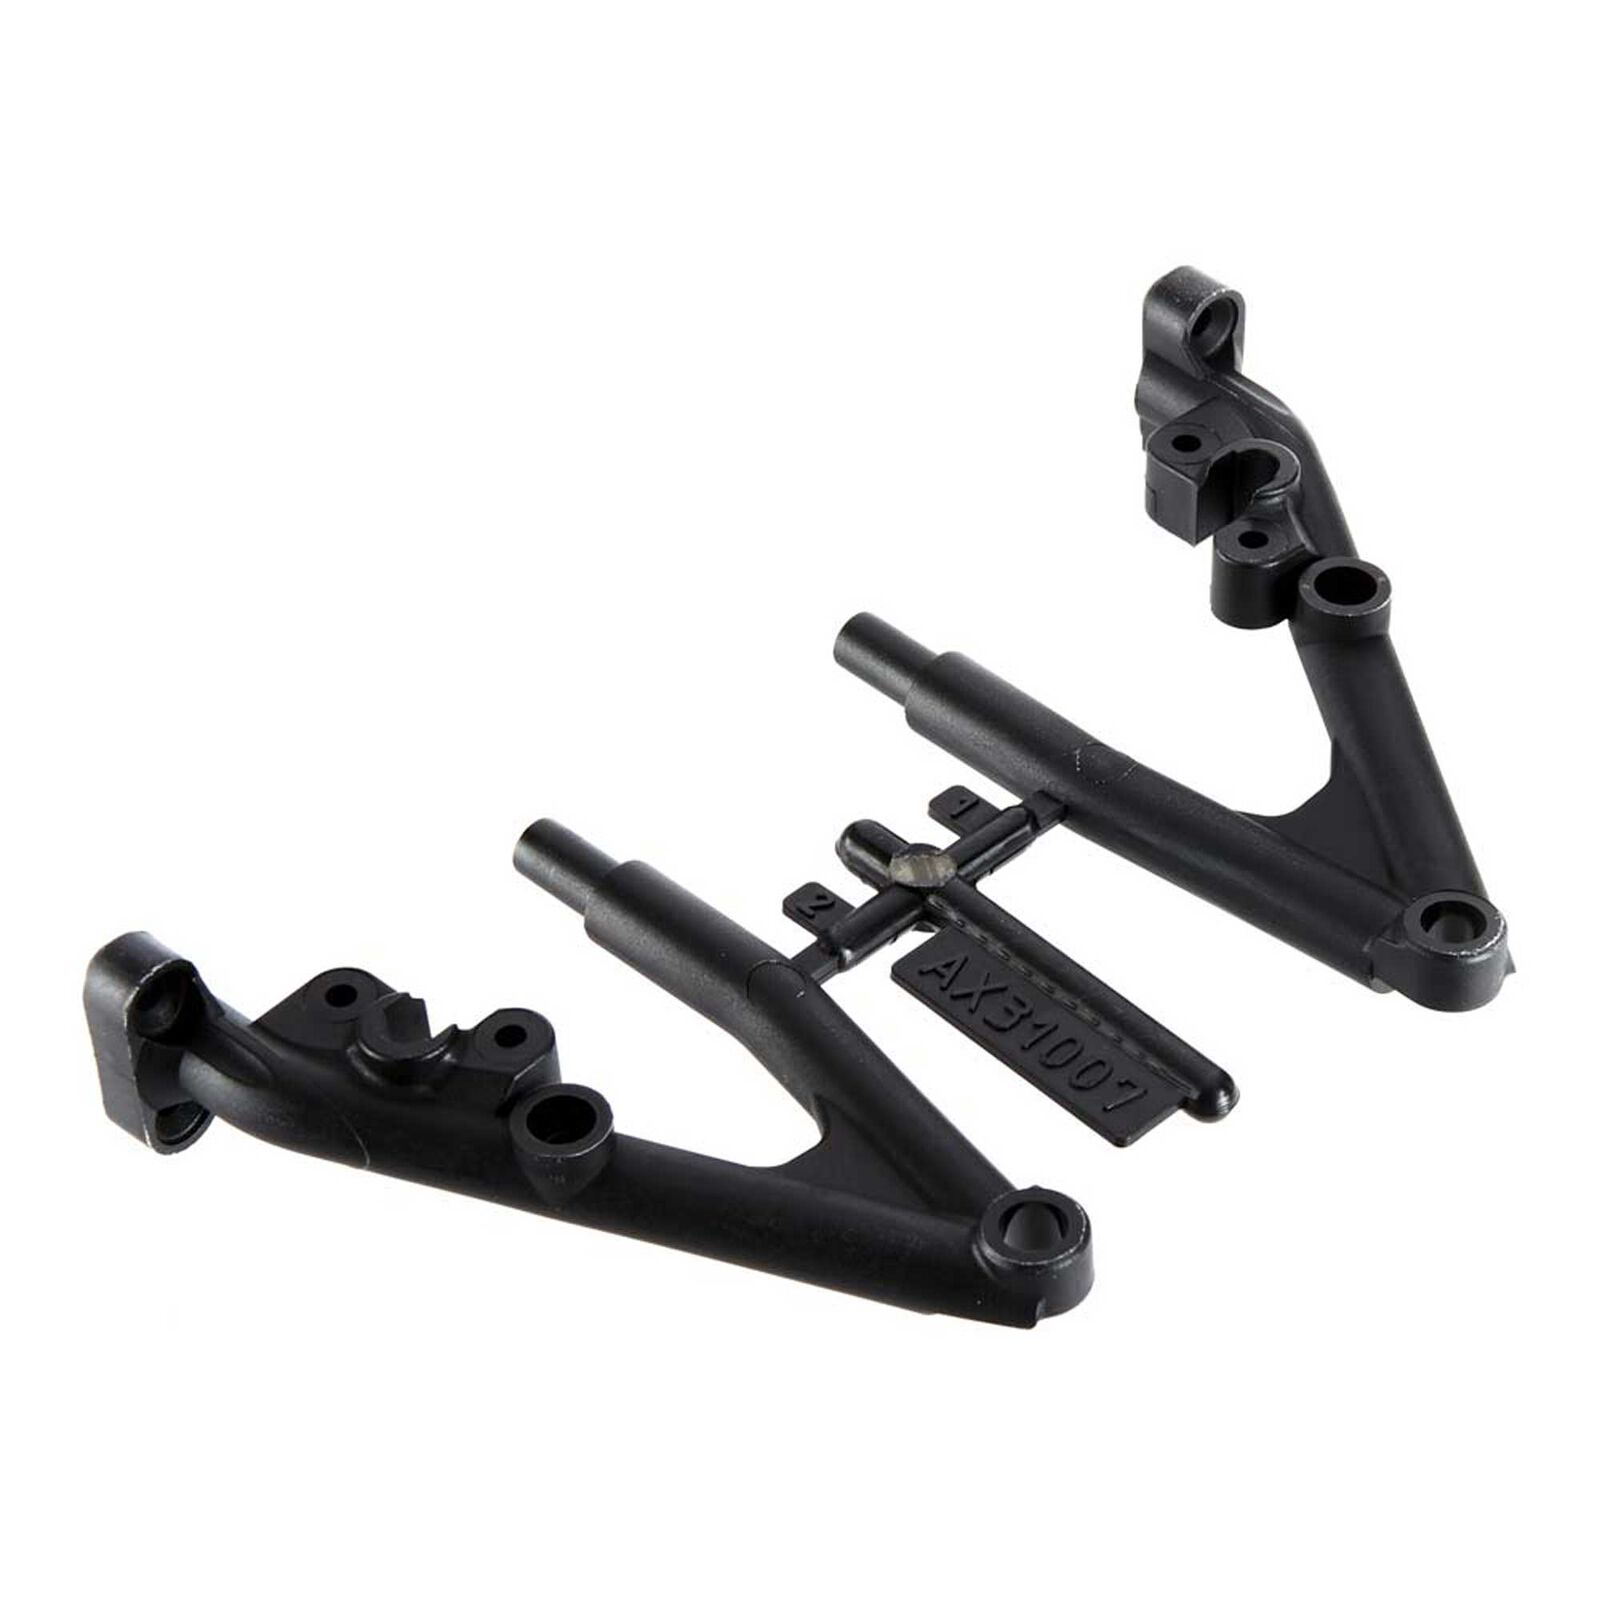 Chassis Rear Risers: Yeti XL